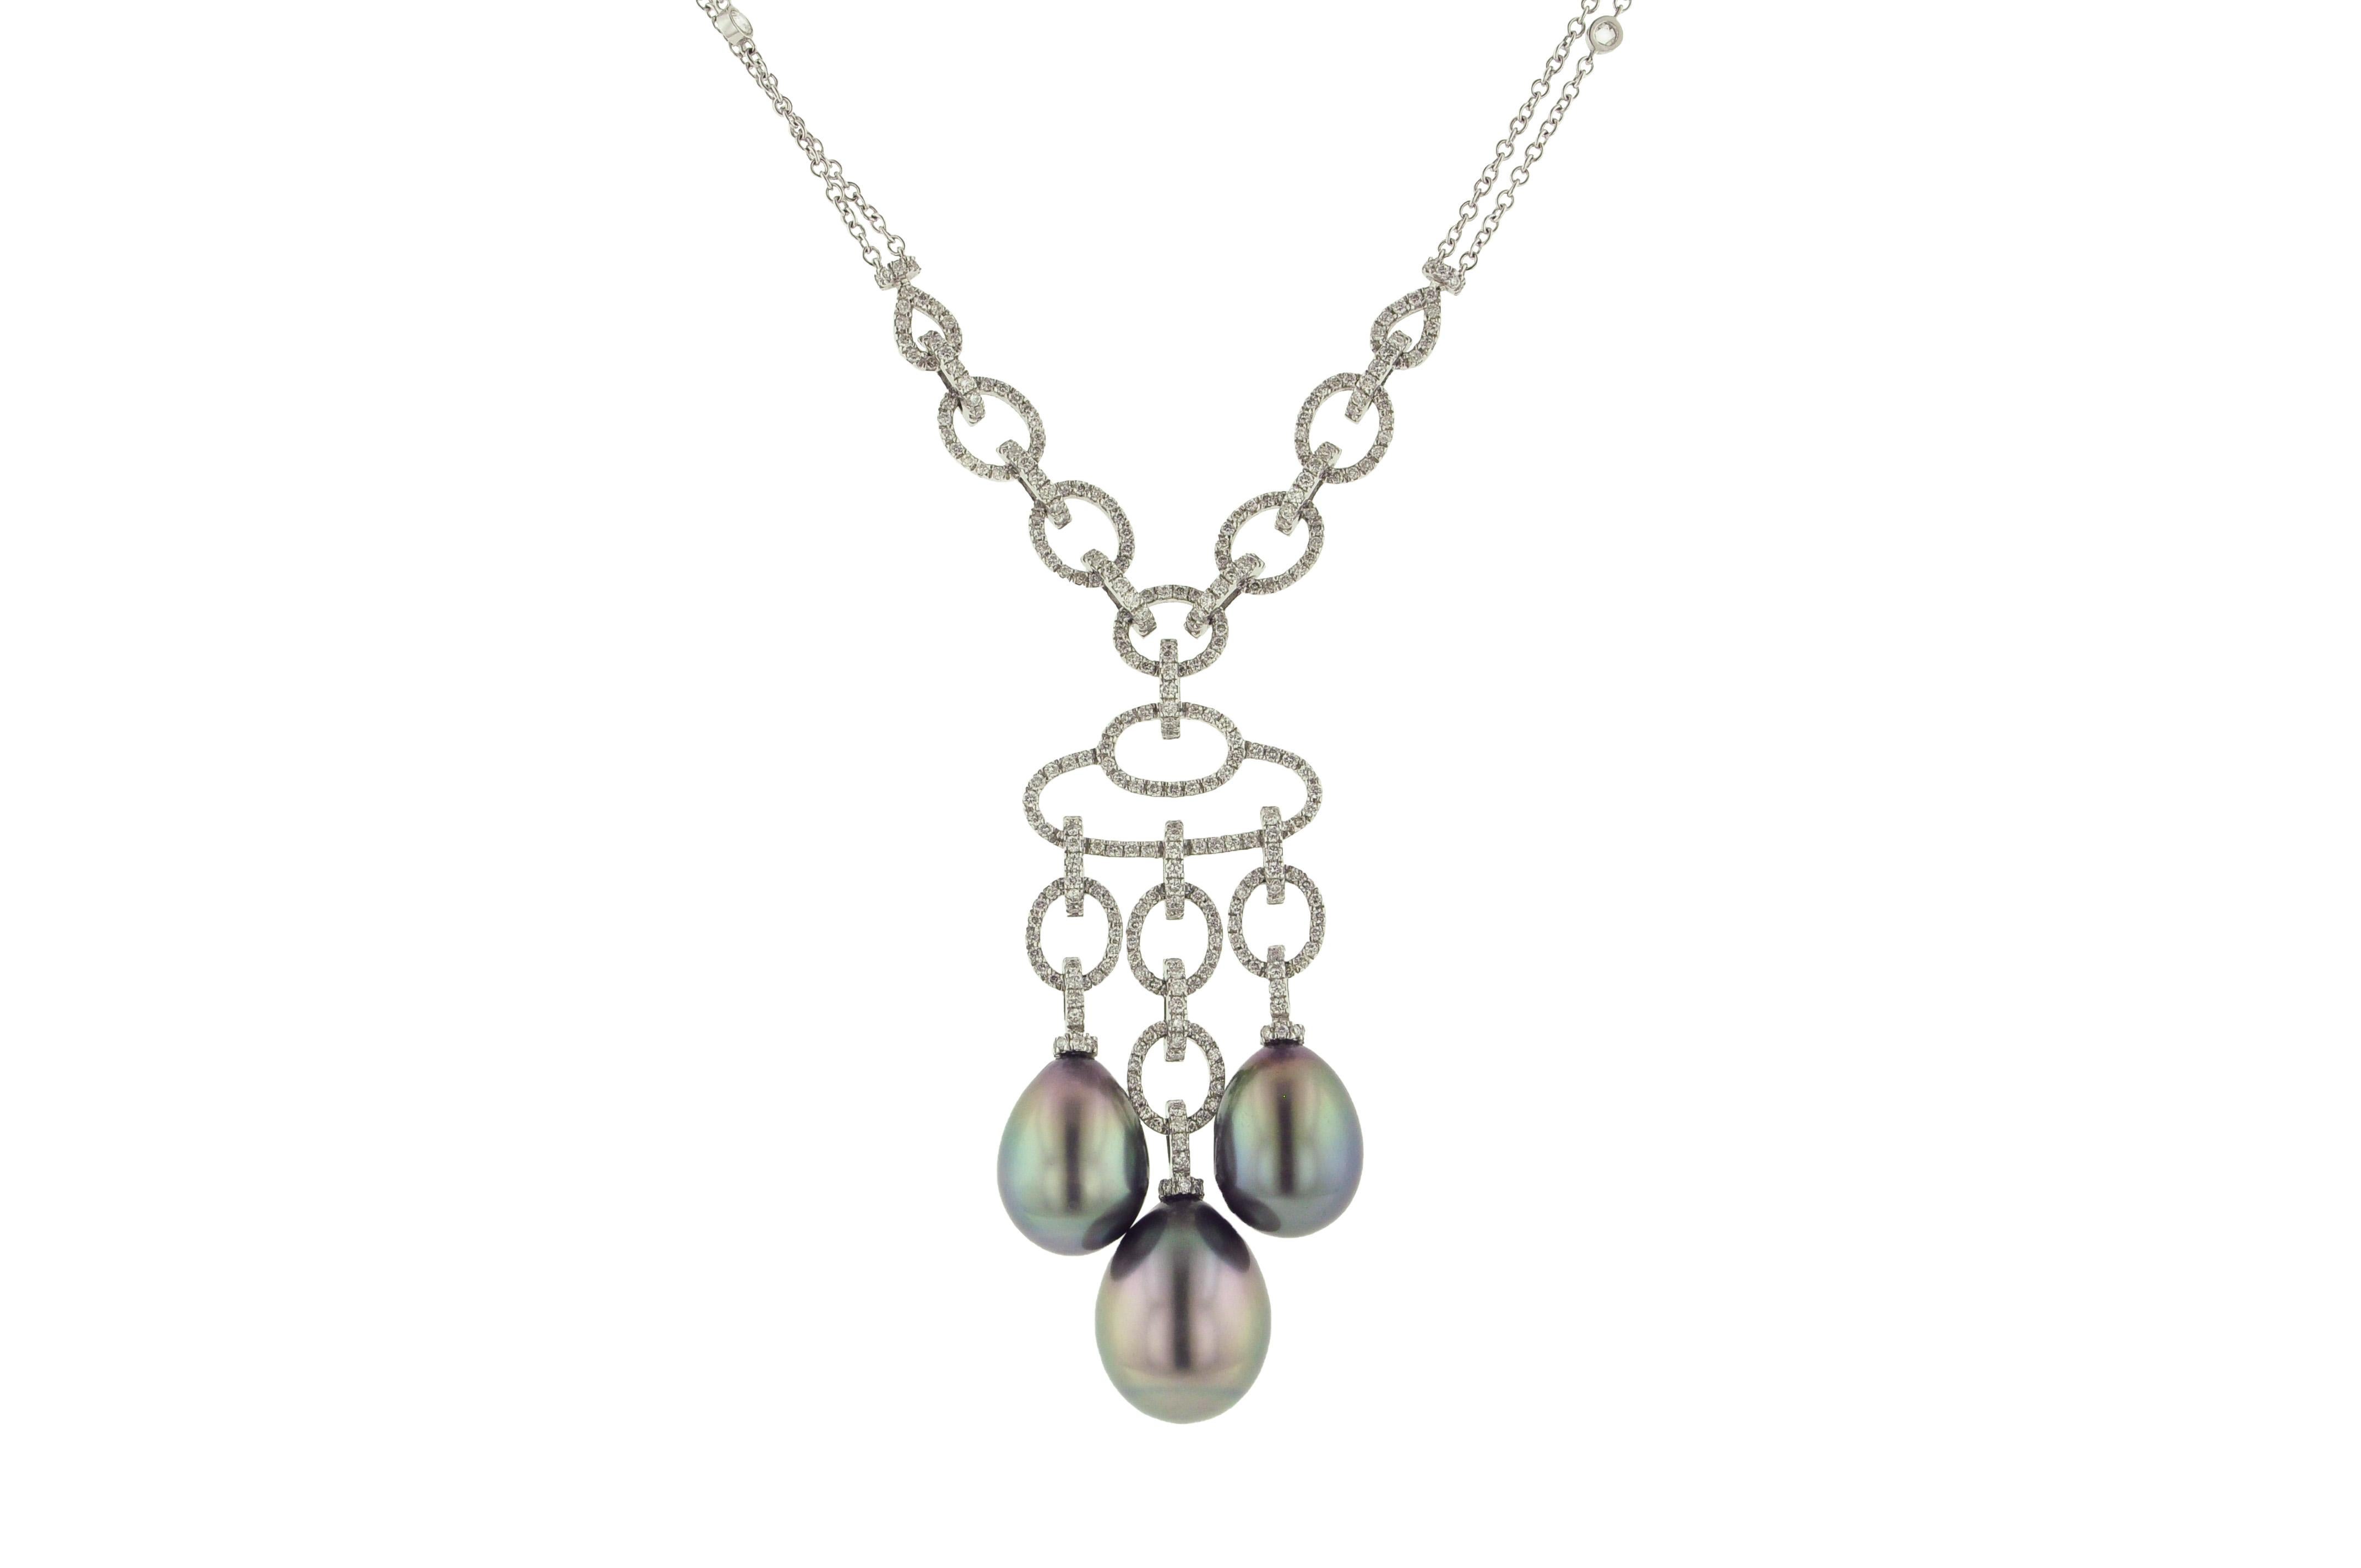 Necklace and earring set crafted in 18 karat white gold with beautiful Tahitian silver grey pearls

The necklace has three gorgeous cultured pearls and 2.55 carats of diamonds.
Length: 16 inches + Pearl Drop 2 1/2 inches

The earrings have two